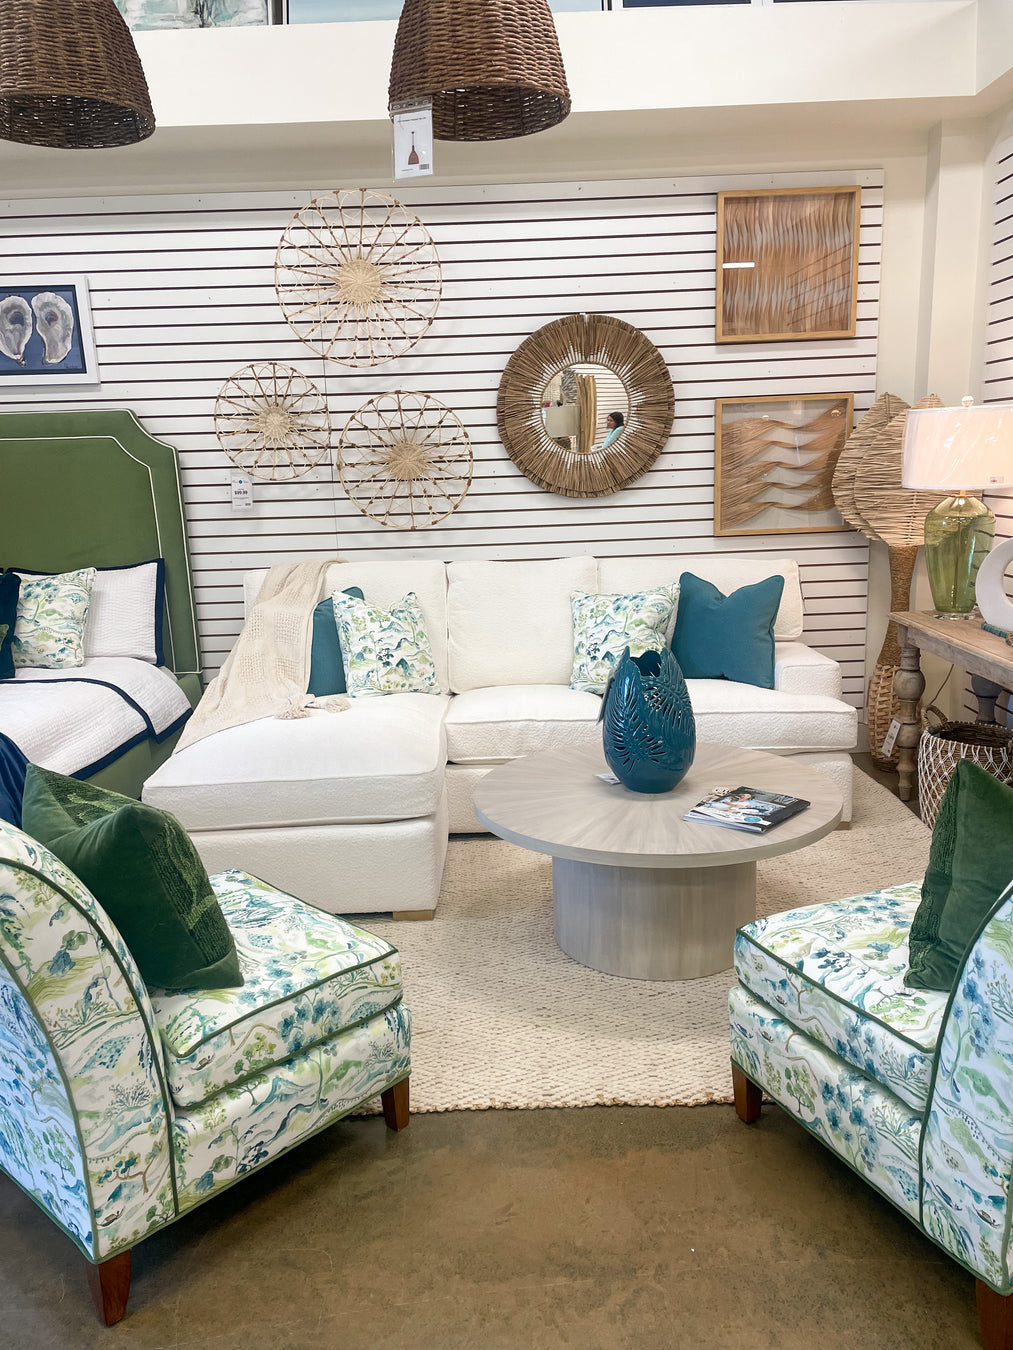 A showcase of loveseats, a bed, accent chairs, and designer wall coverings.